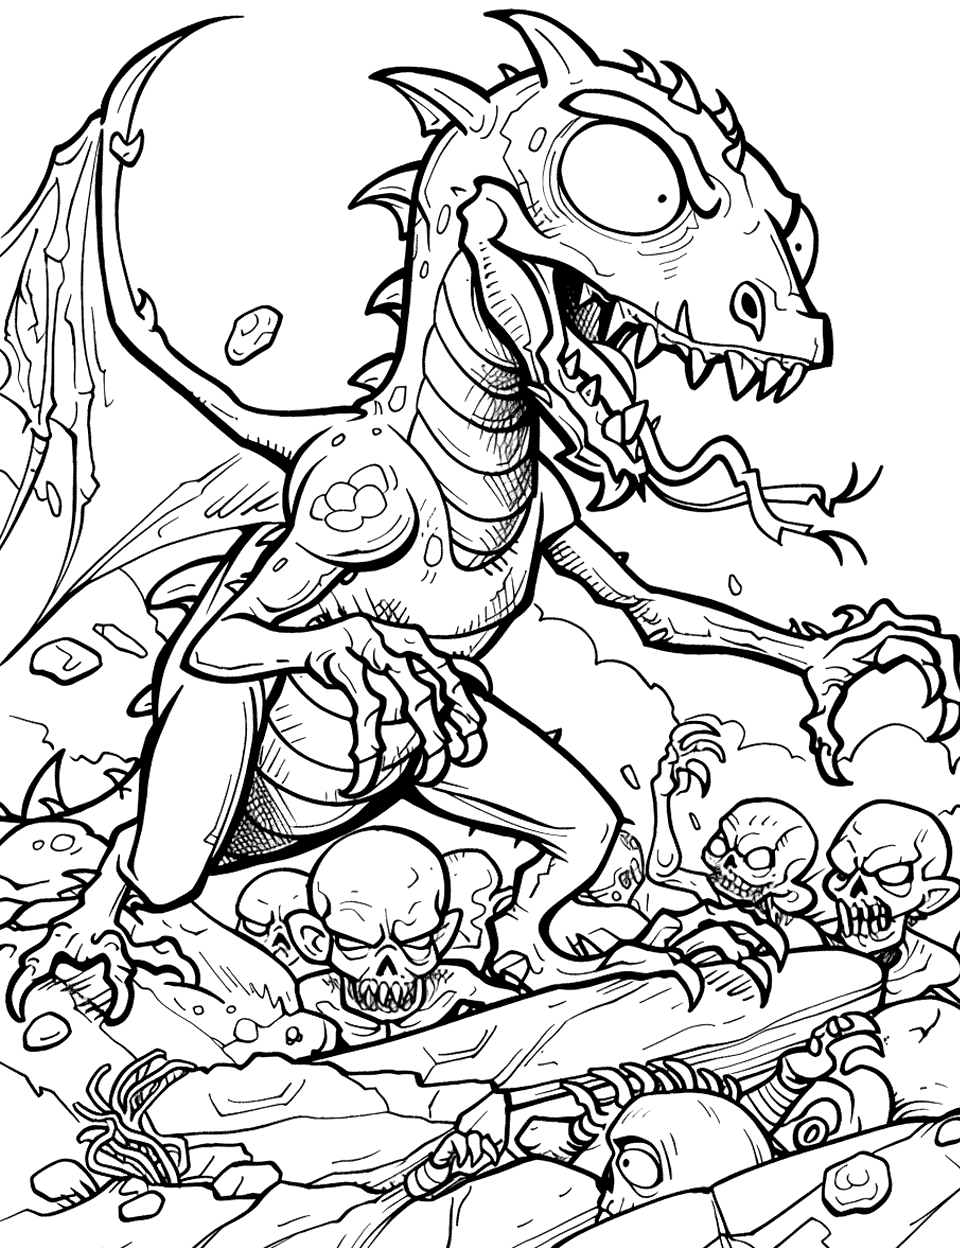 Dragon Zombie Coloring Page - A dragon zombie in its lair looking for more food.